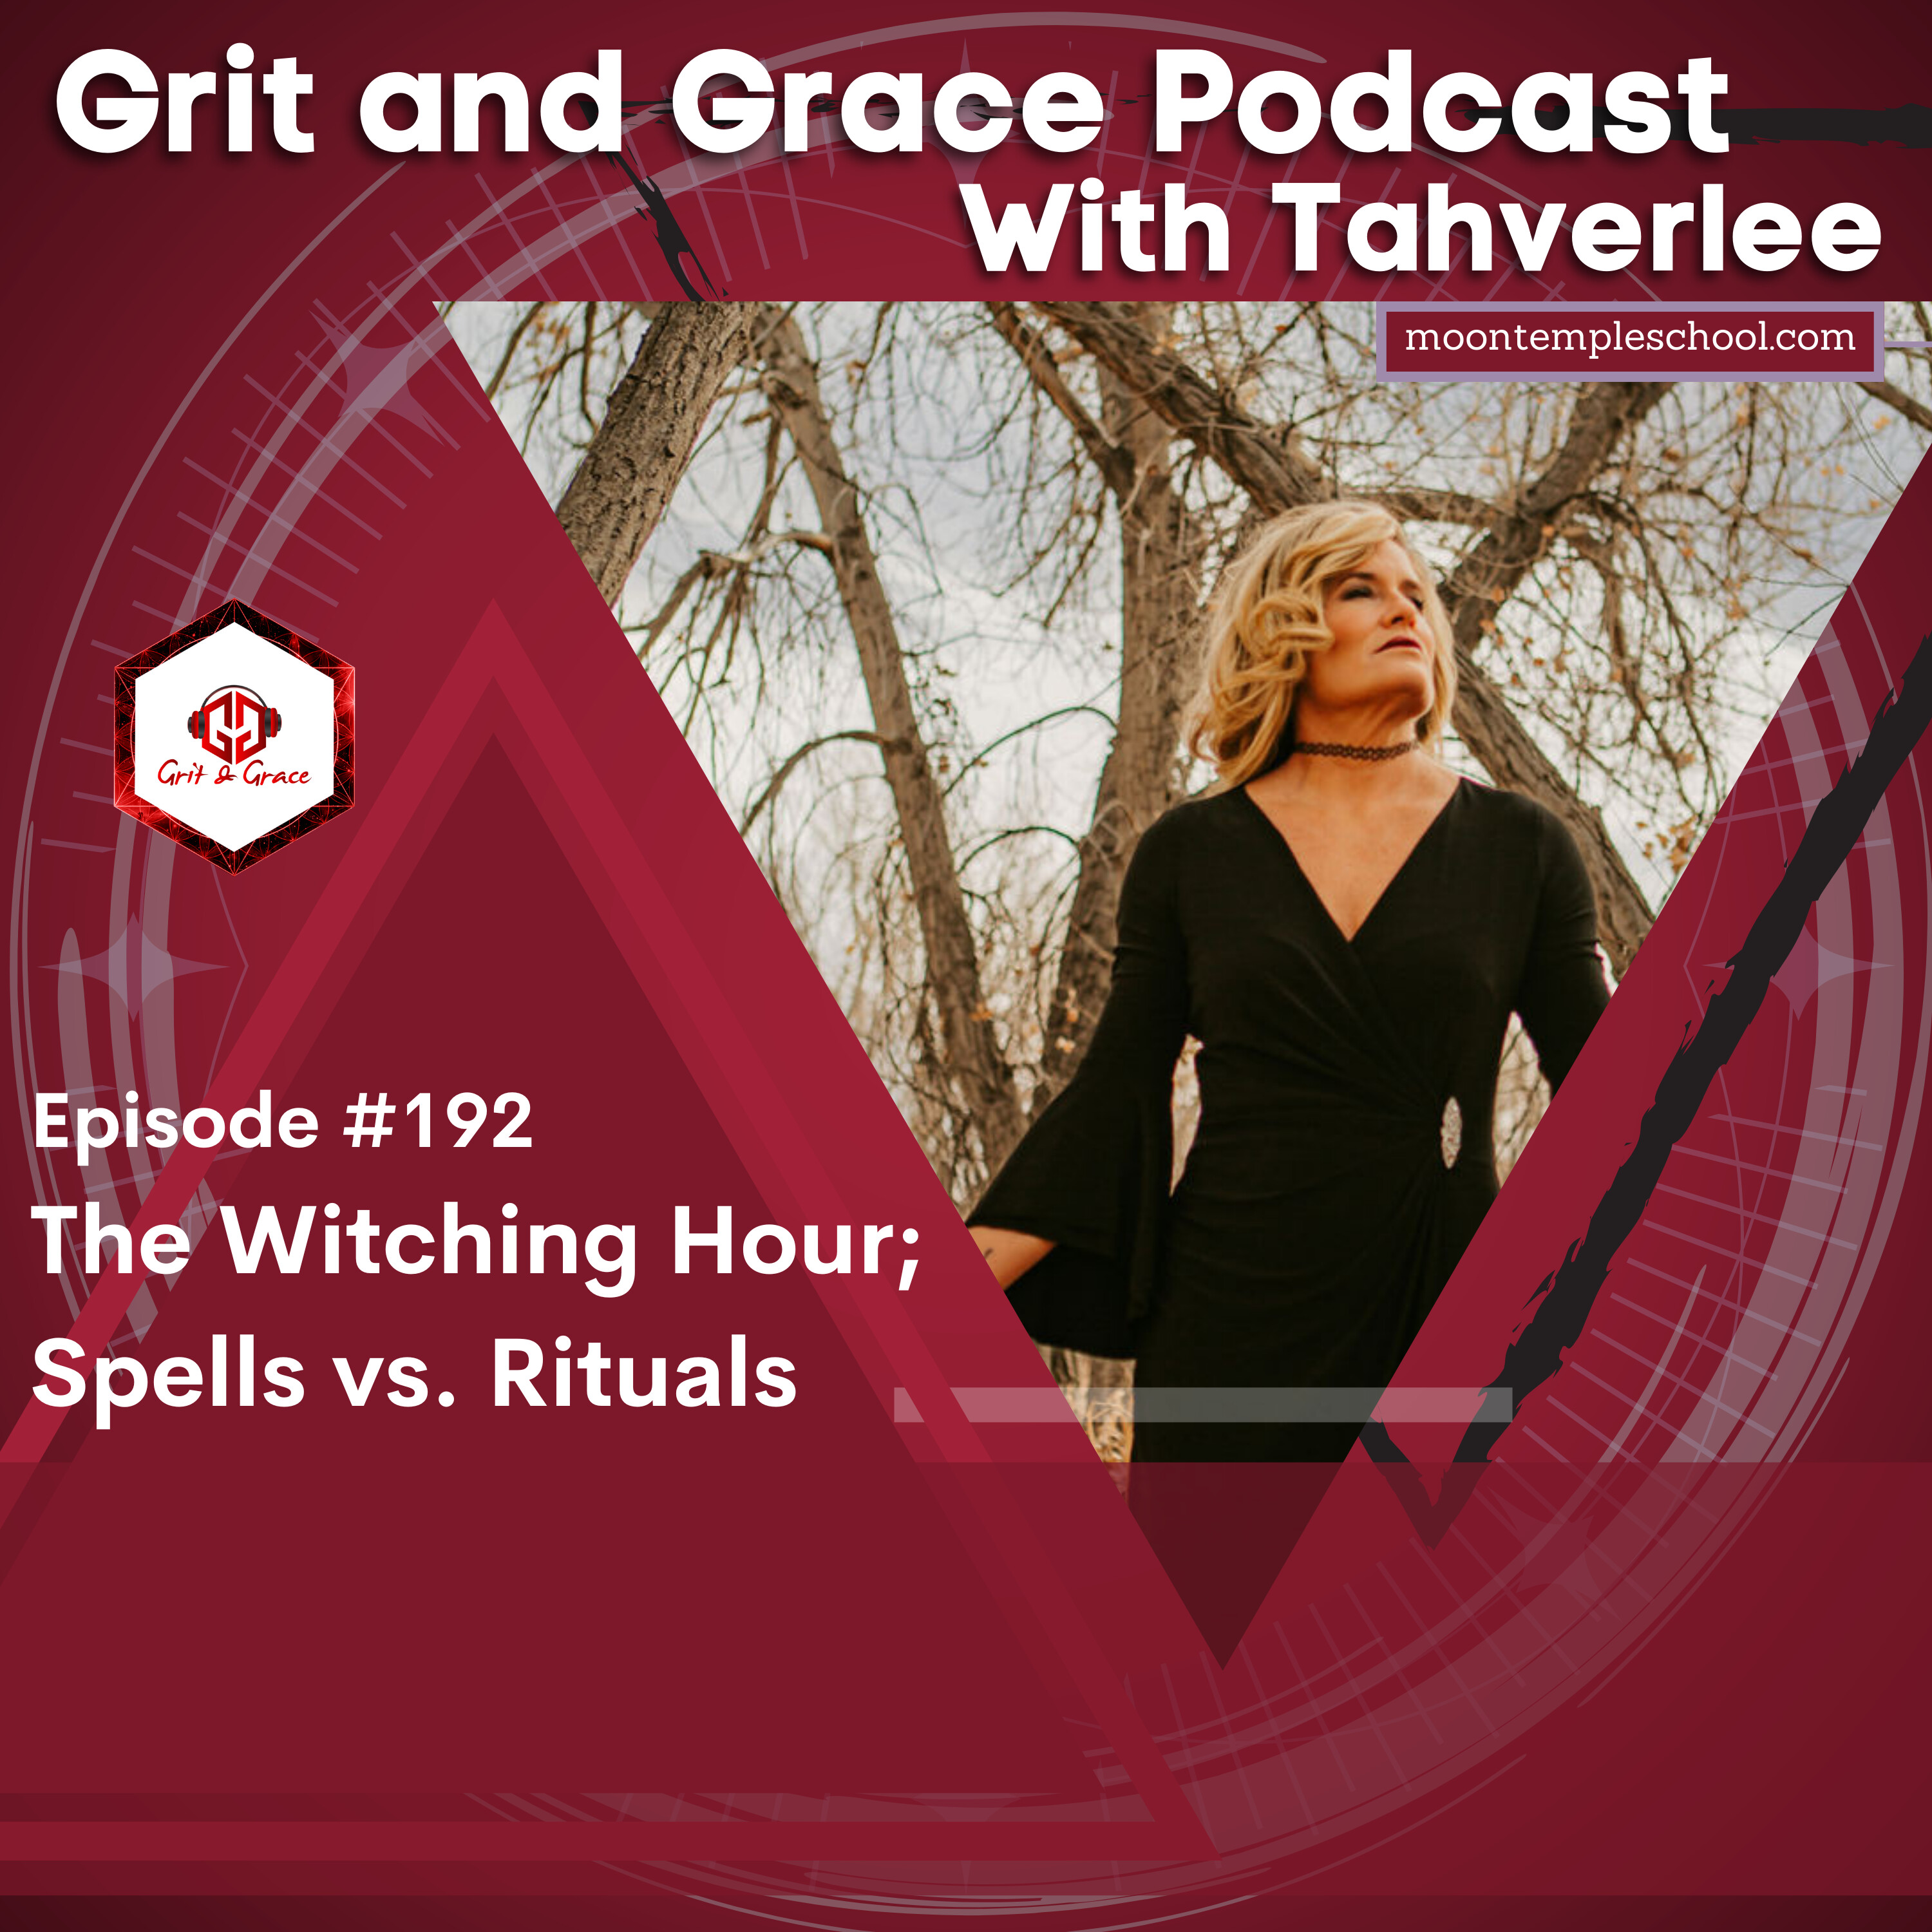 The Witching Hour; Spells vs. Rituals